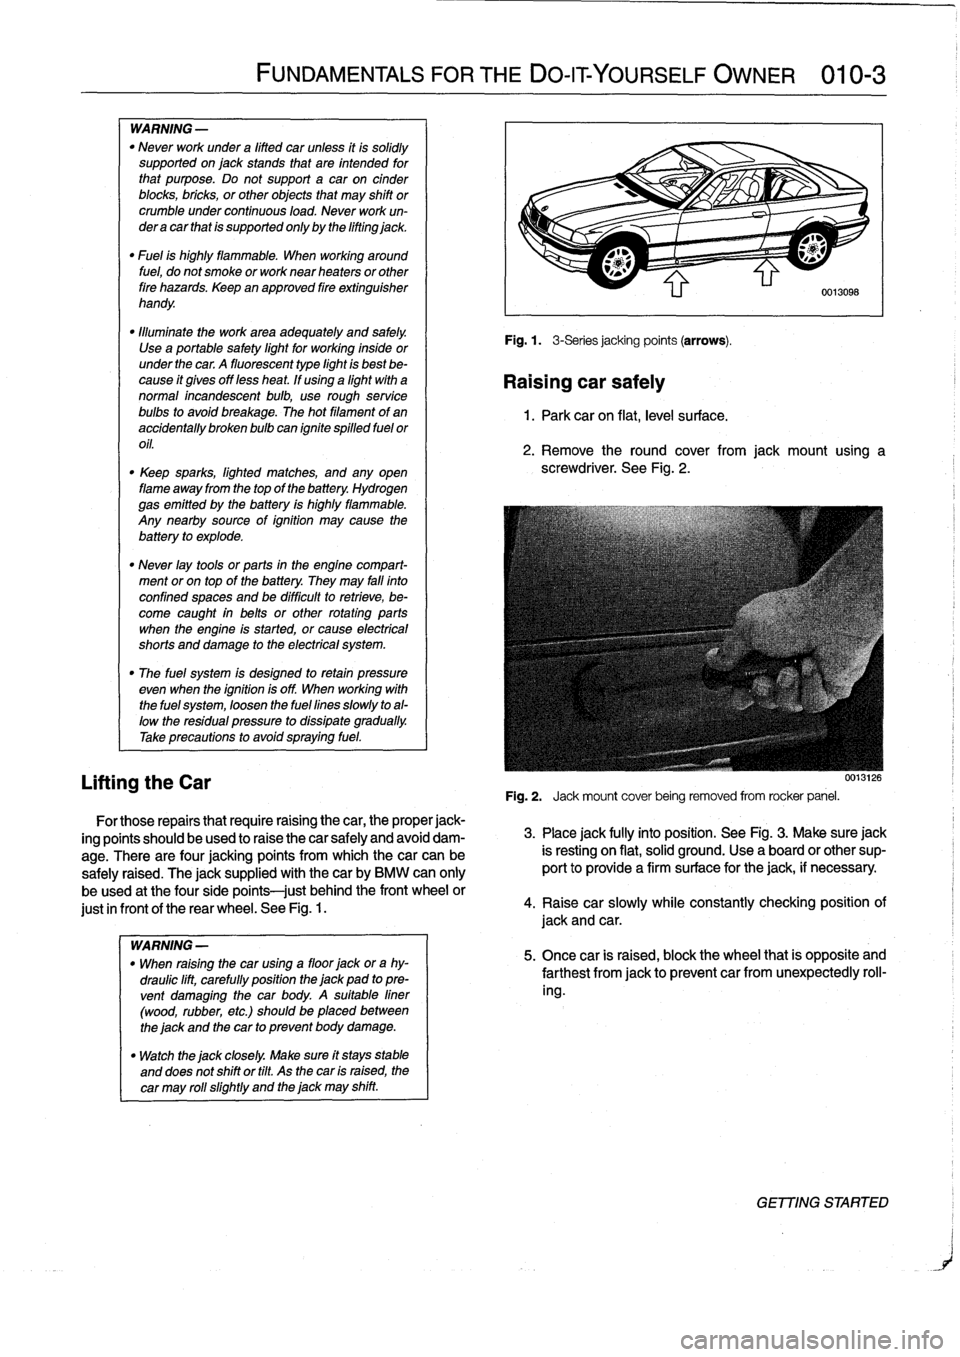 BMW 328i 1993 E36 Workshop Manual 
WARNING
-

"
Never
work
under
a
lifted
car
unless
it
is
solidly
supported
on
jack
stands
that
are
intended
for
that
purpose
.
Do
not
support
a
car
on
cinder
blocks,
bricks,
or
other
objects
that
may
